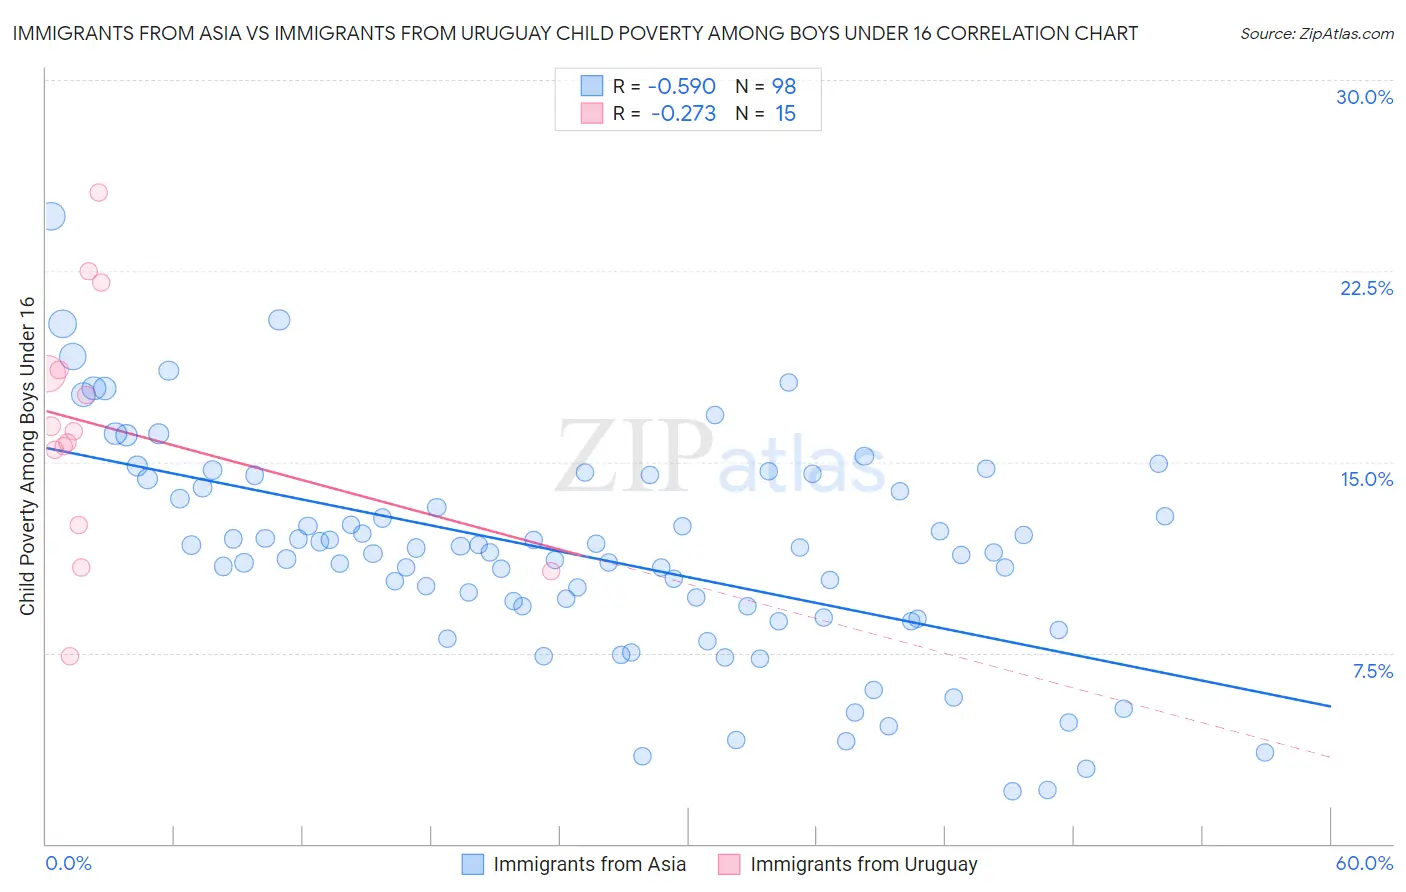 Immigrants from Asia vs Immigrants from Uruguay Child Poverty Among Boys Under 16